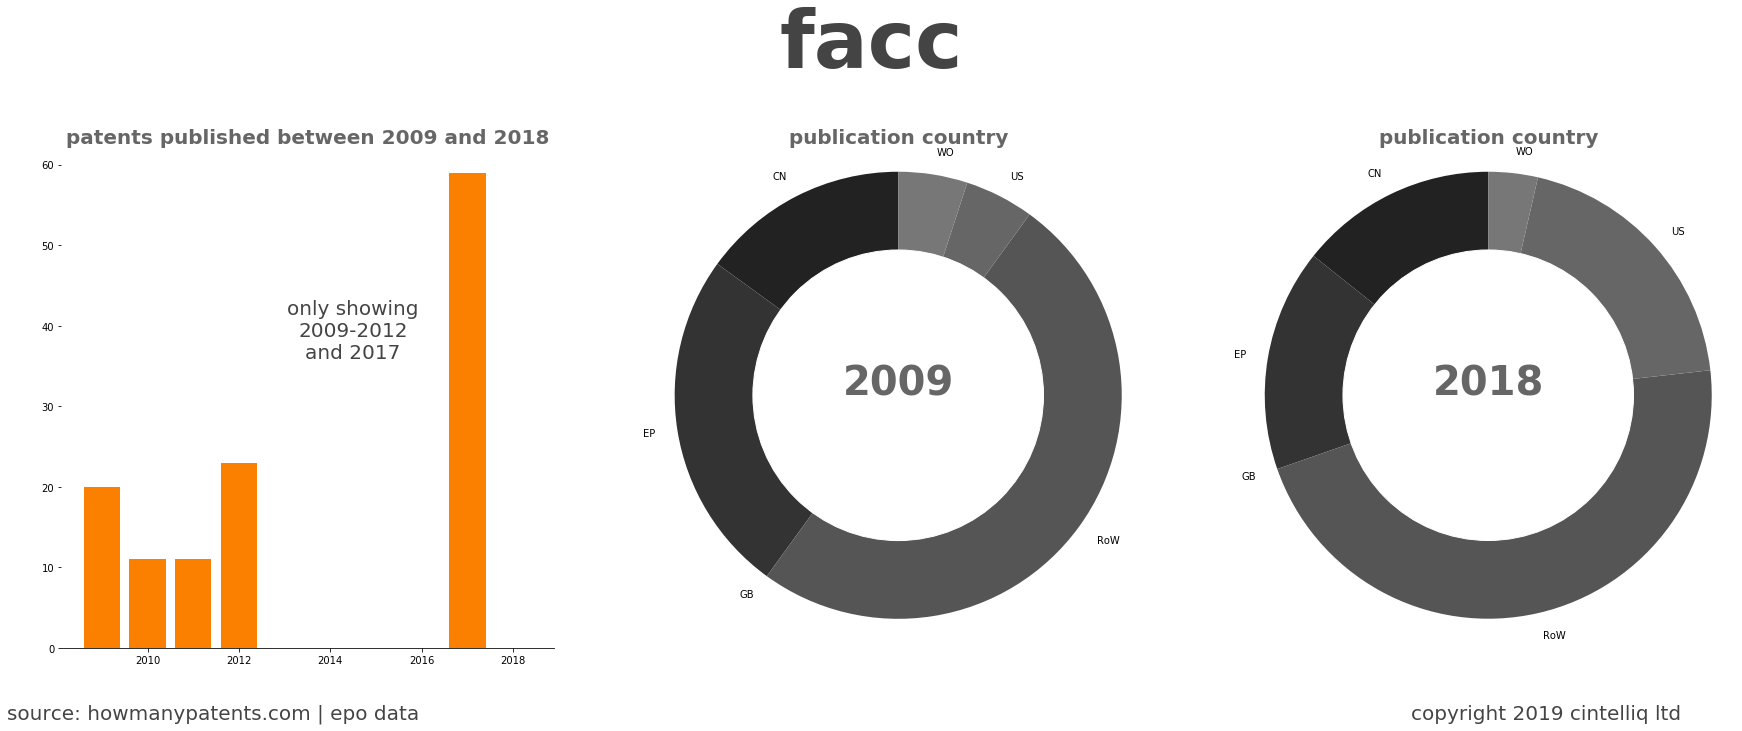 summary of patents for Facc